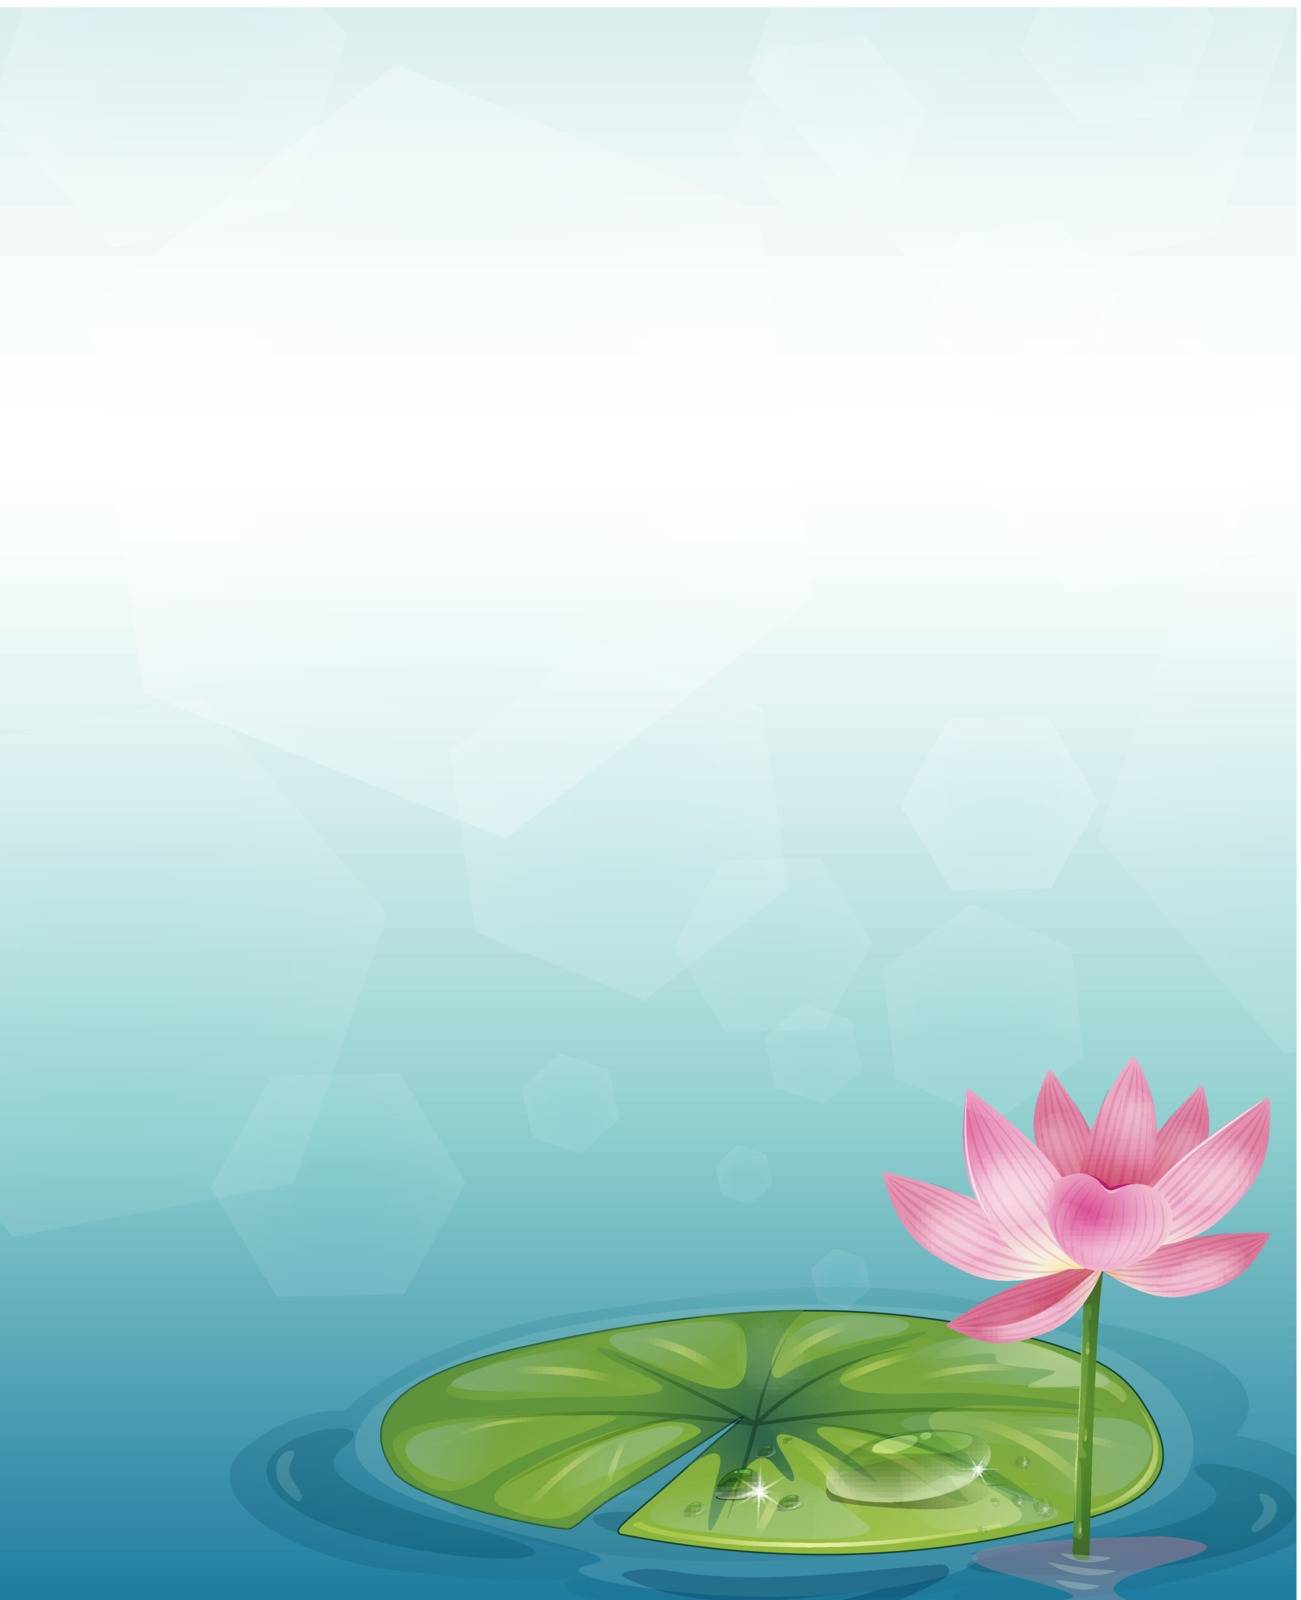 A stationery with a waterlily and a pink flower by iimages